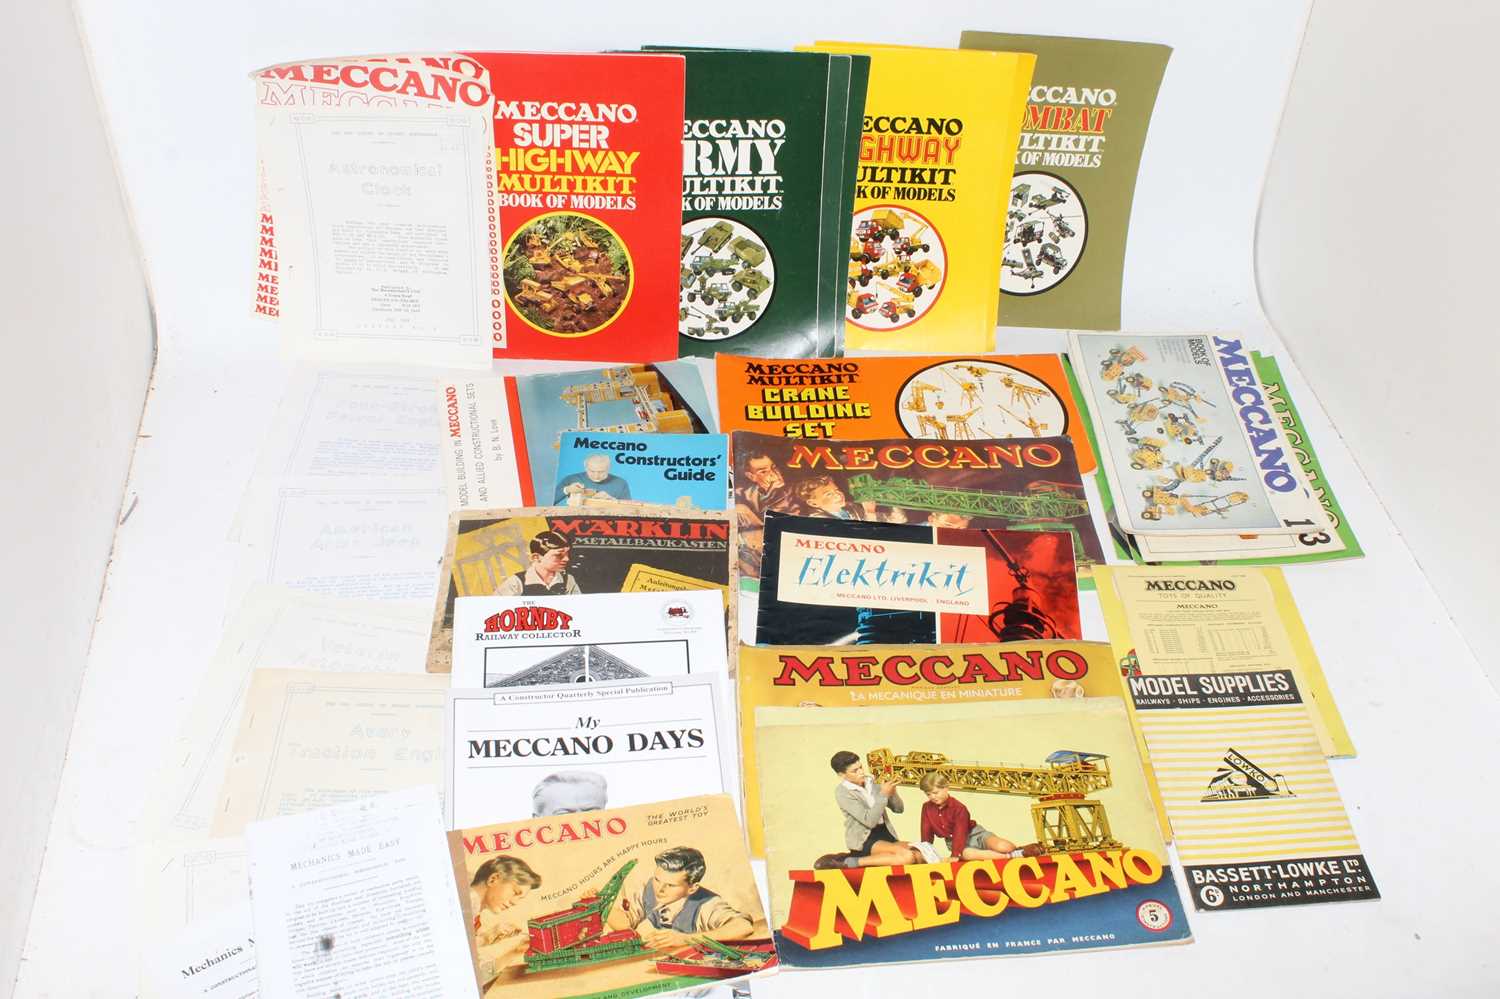 Large quantity of Meccano literature 1920s to 1960s, well used condition - Image 2 of 6